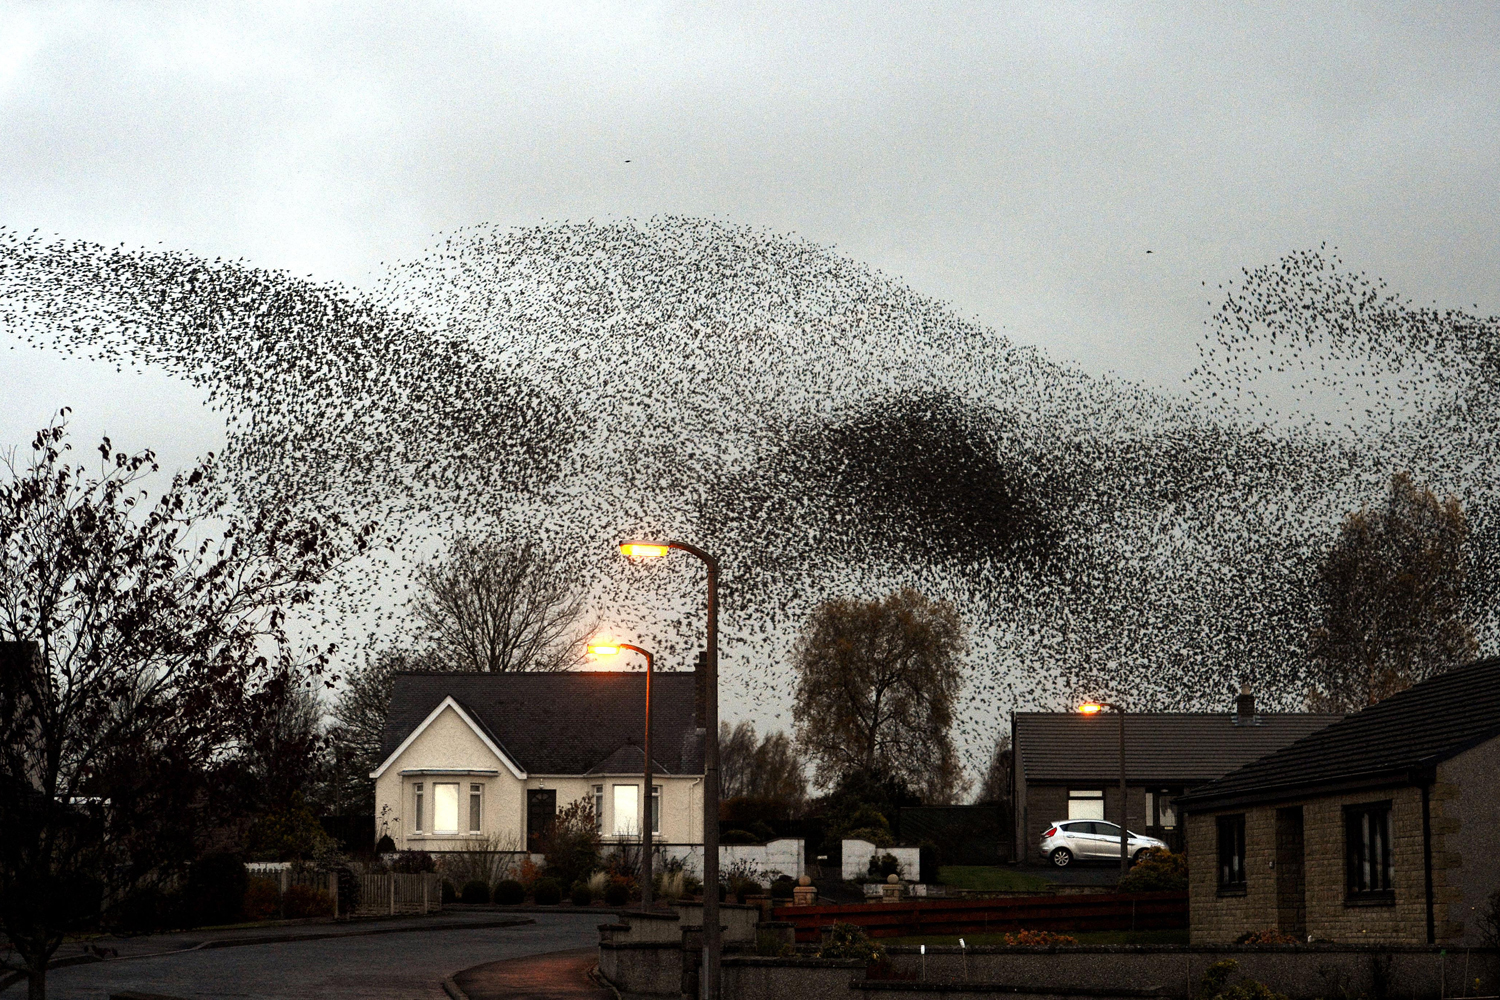 Image: Nov. 11, 2012. A murmuration of starlings put on an a display over the town of Gretna, Scotland.